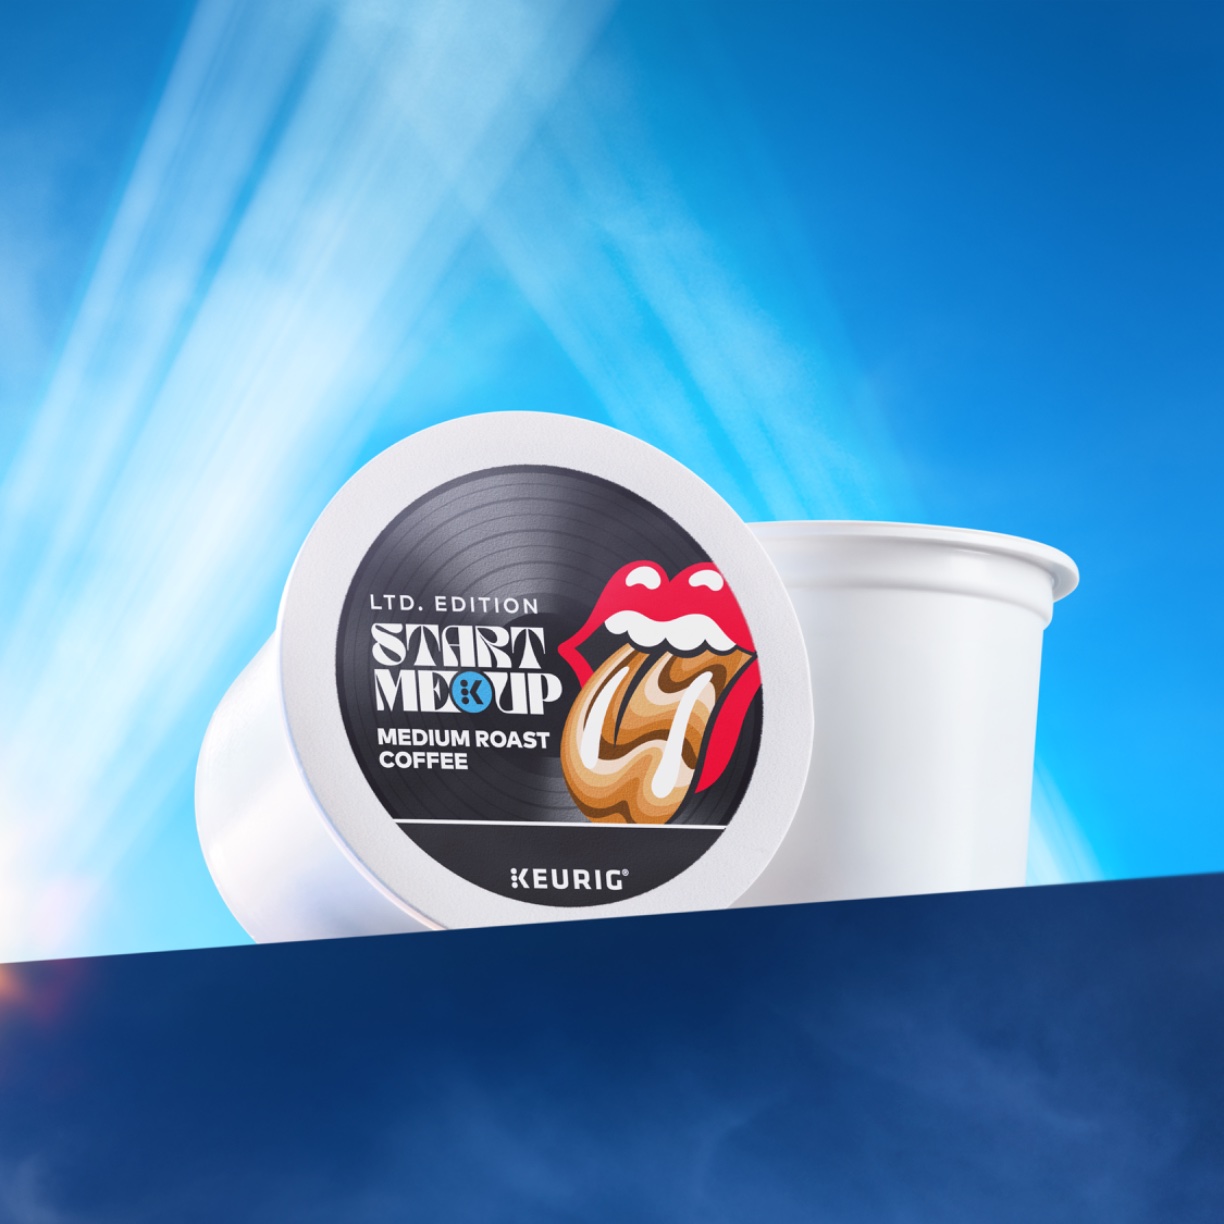 Keurig + Rolling Stones Collaboration Features An Iconic Rock & Roll Aesthetic